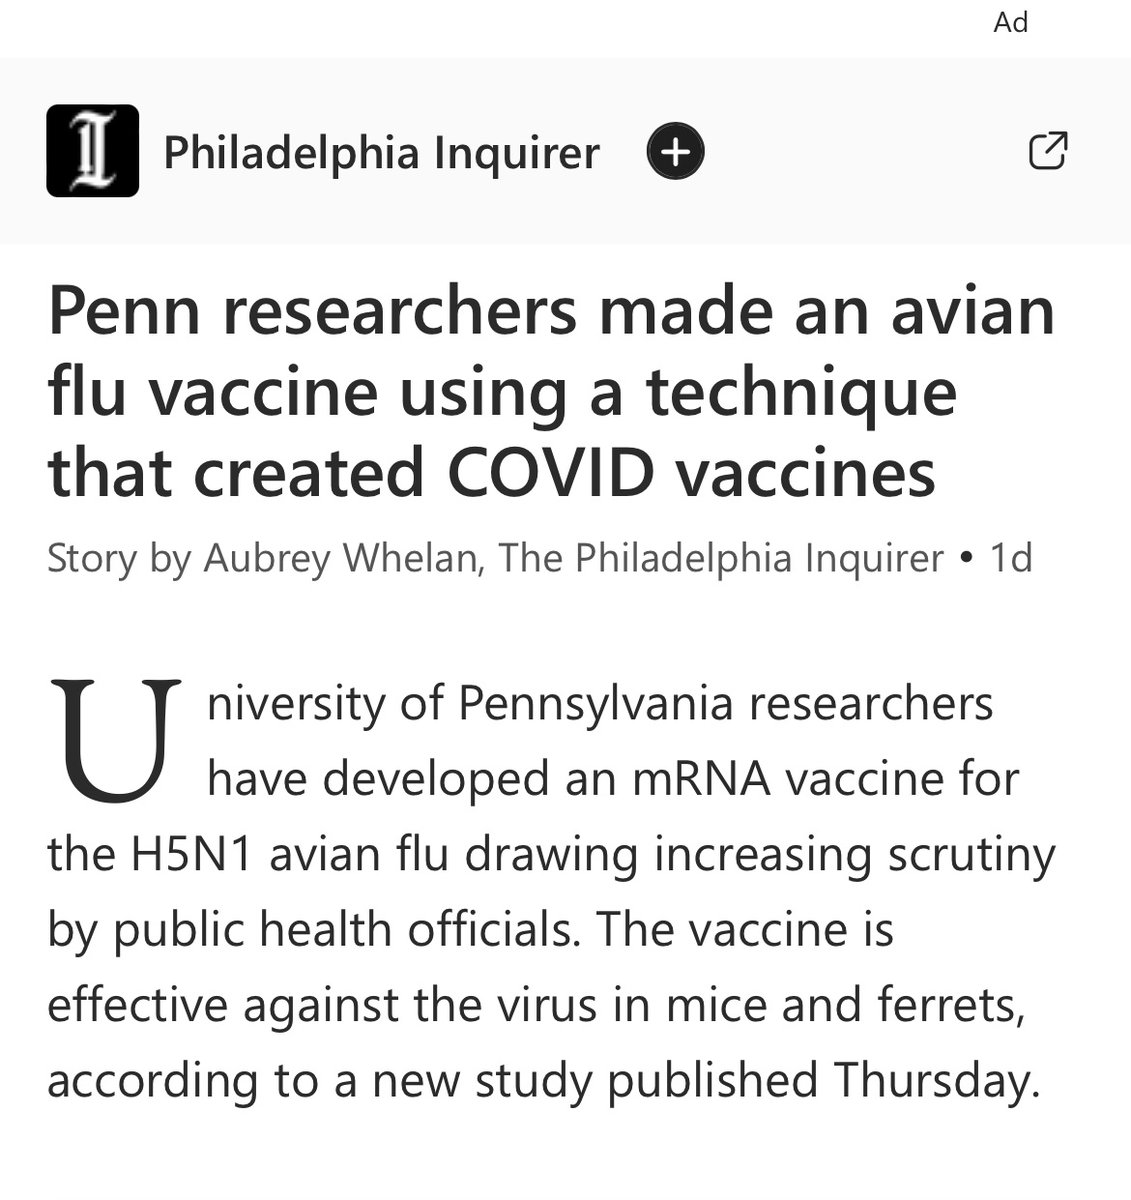 Oh look! Avian flu vaccine is just in time to save us. Isn’t that convenient? 🤡